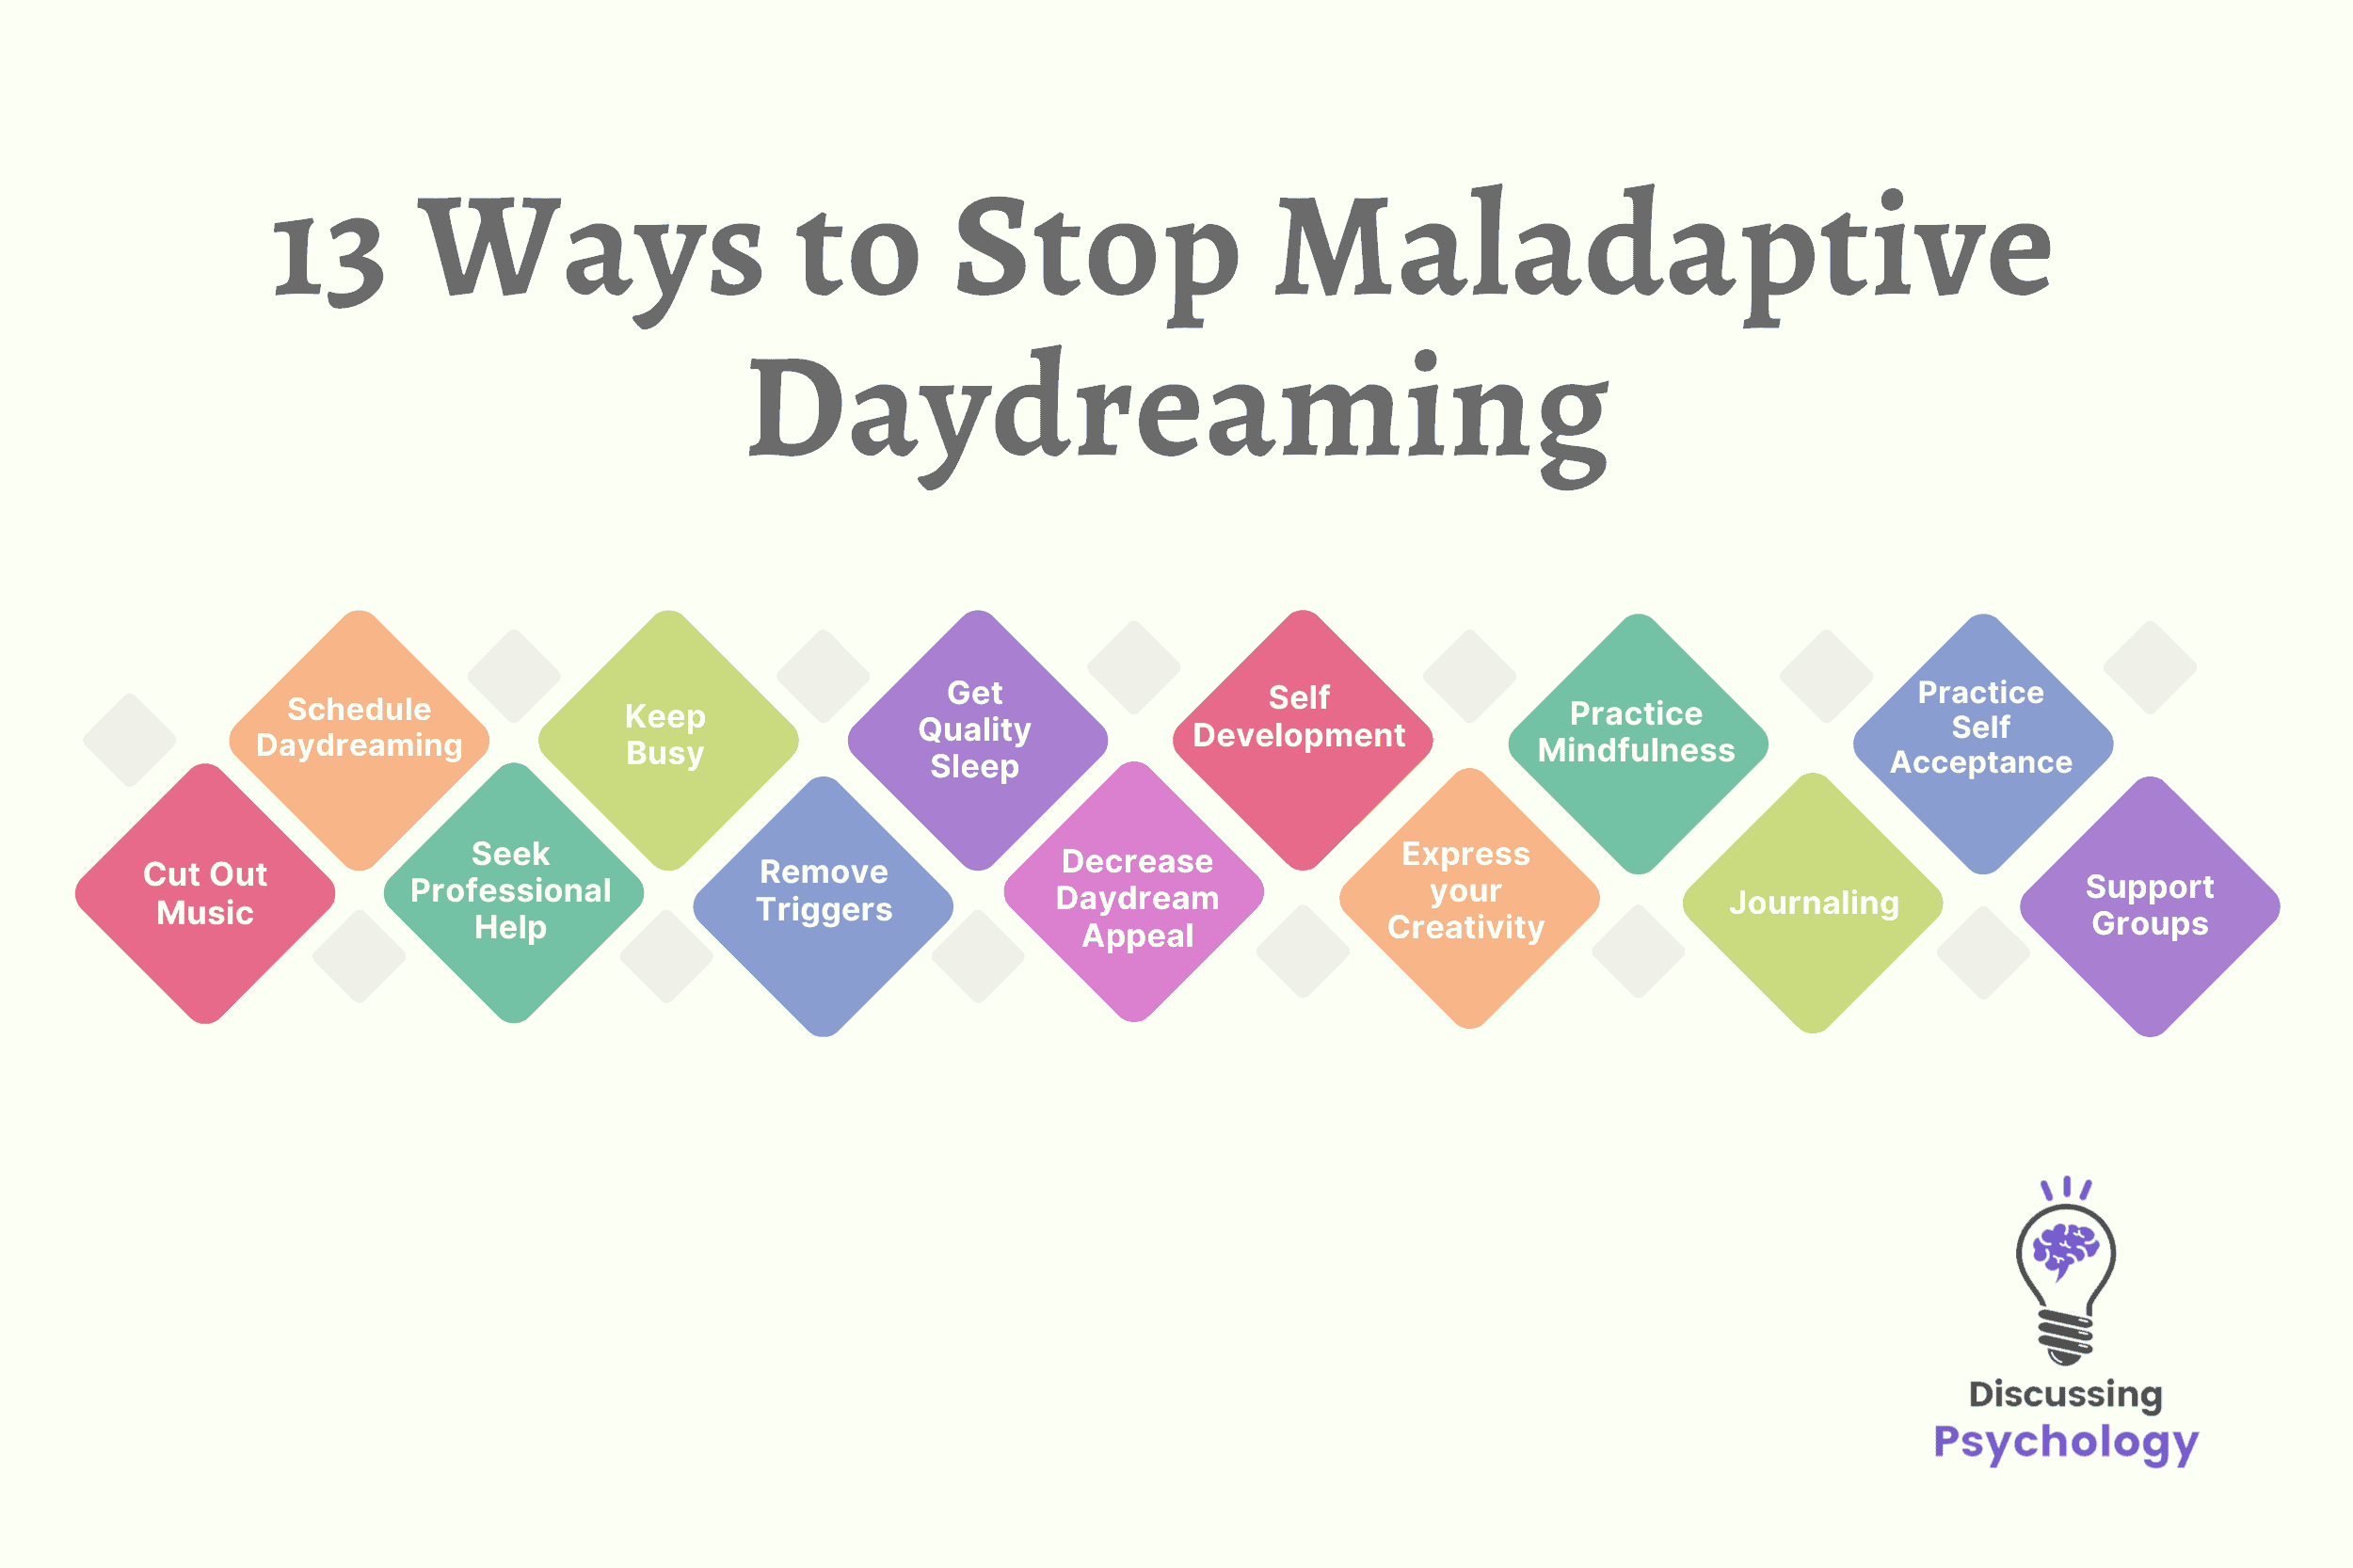 Colored infographic showing 13 different ways to stop maladaptive daydreaming.